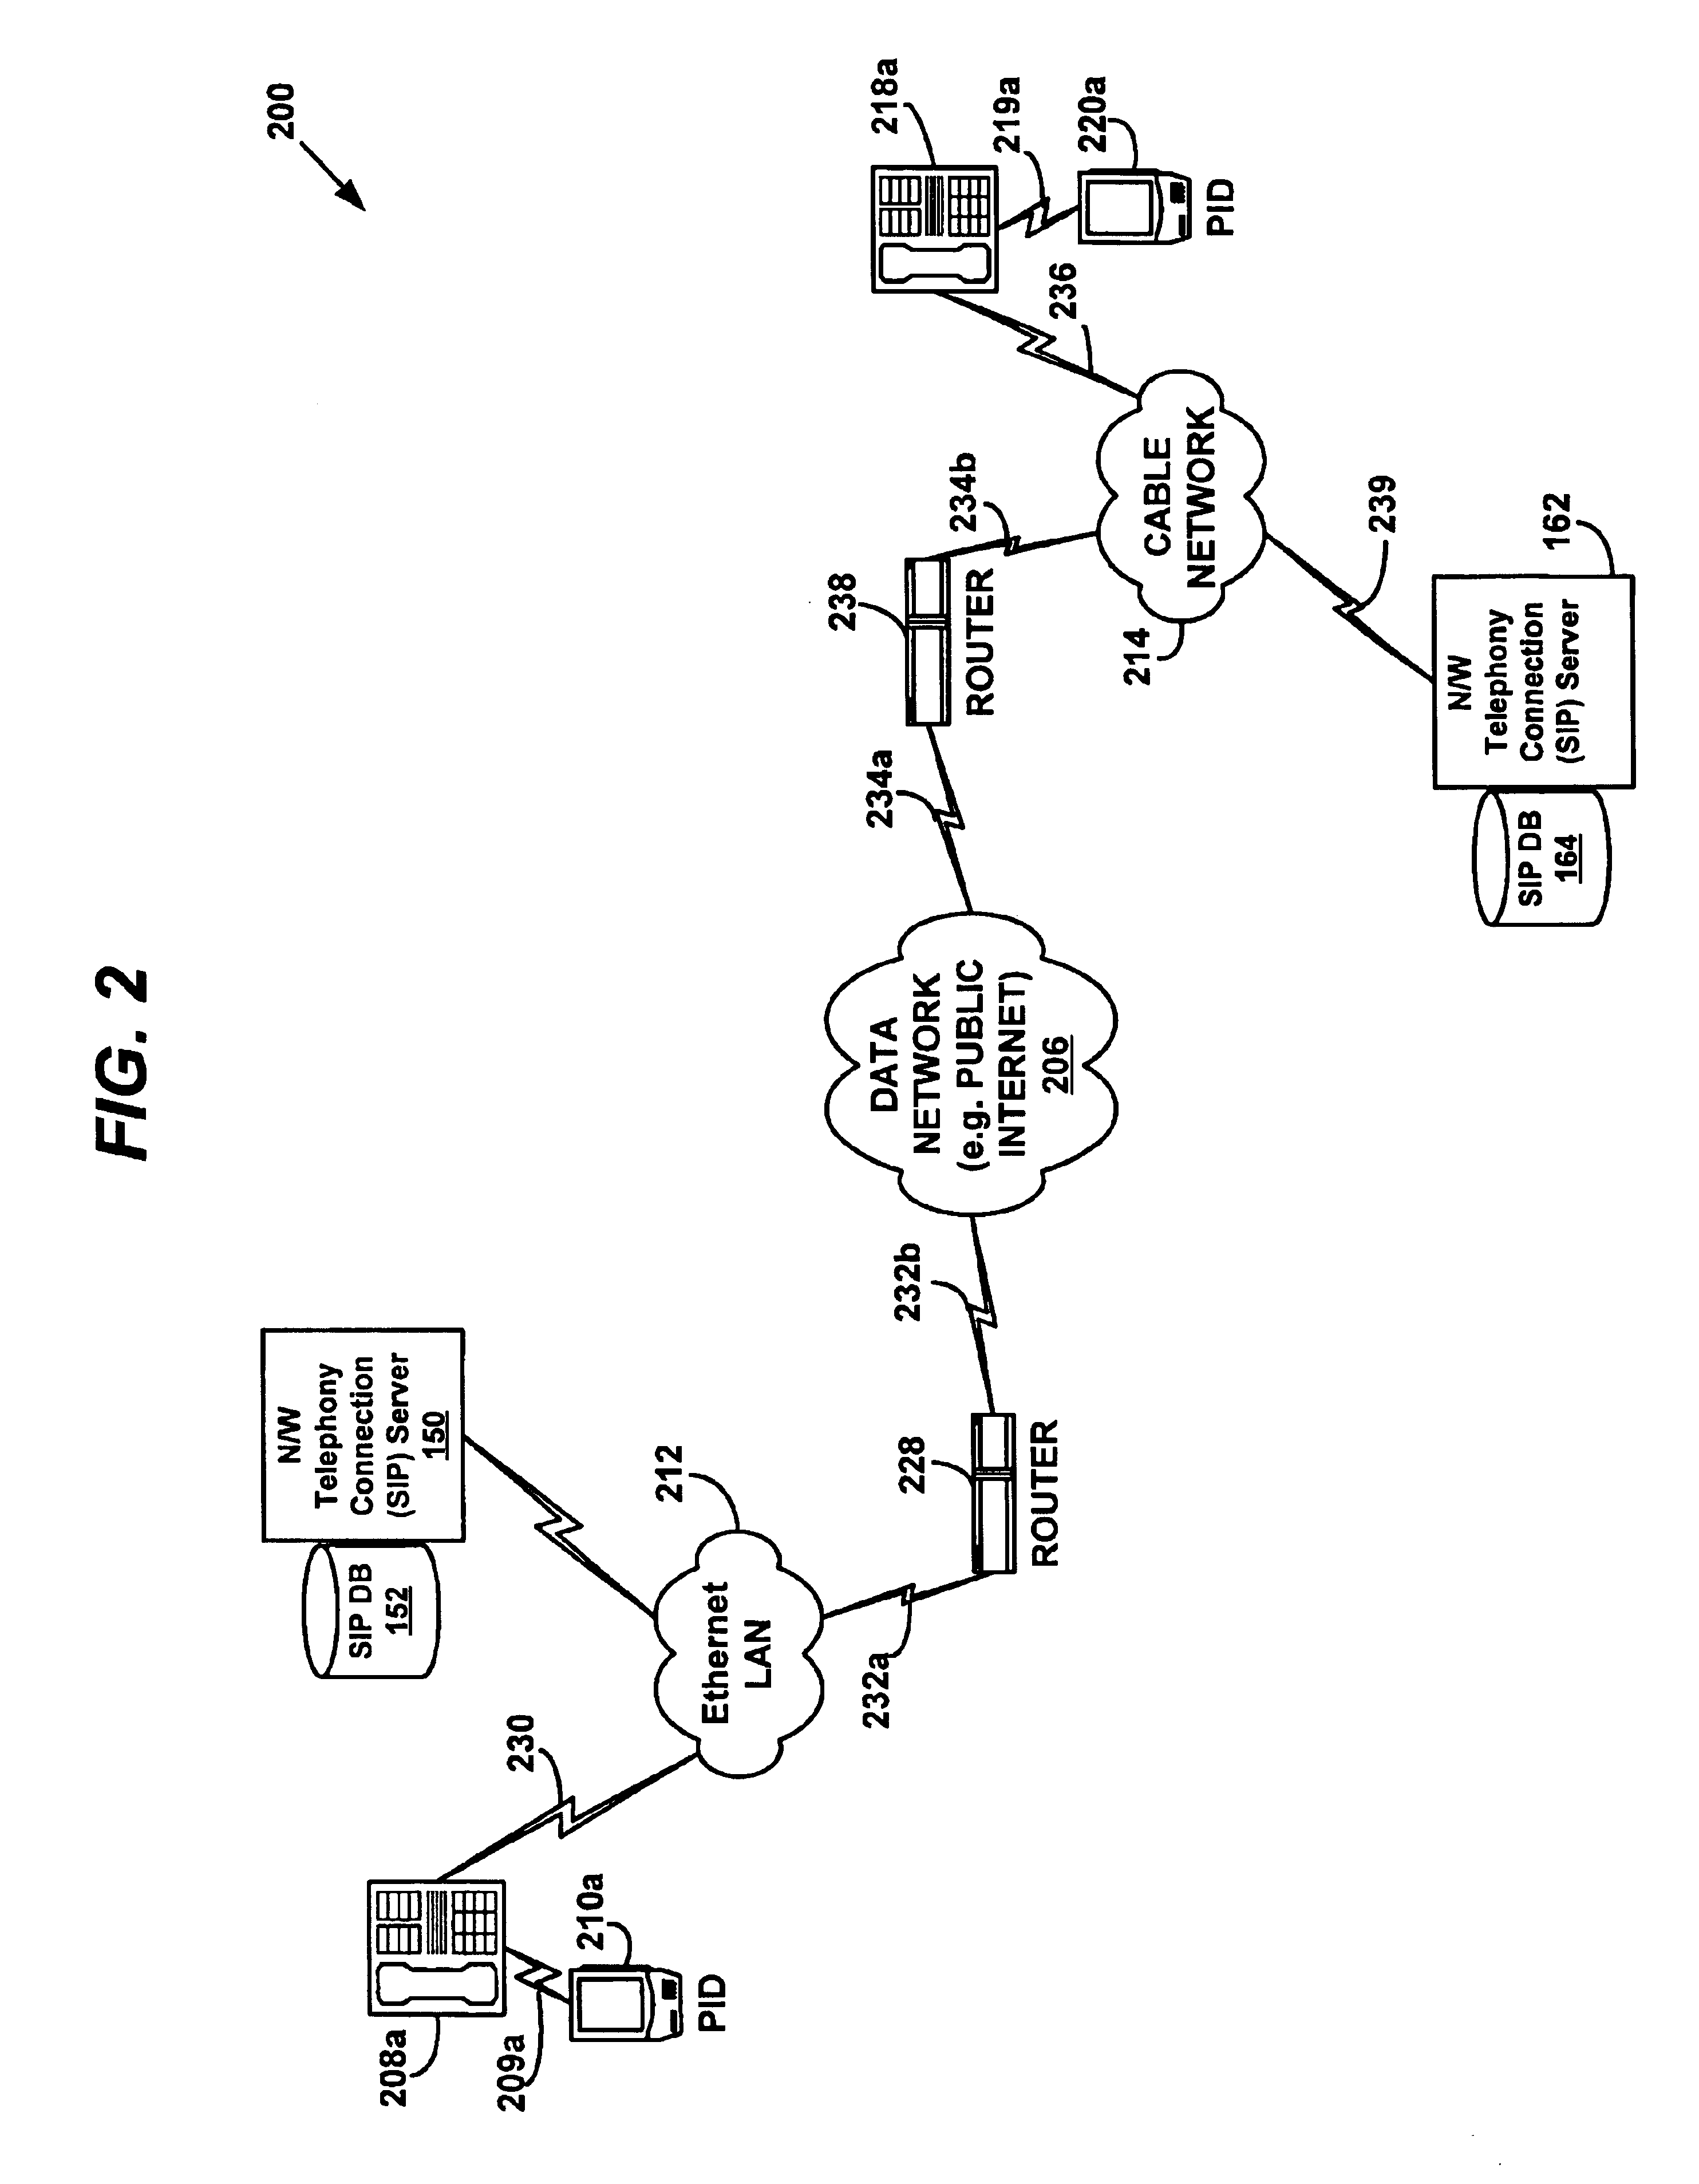 System and method for enabling encryption/authentication of a telephony network